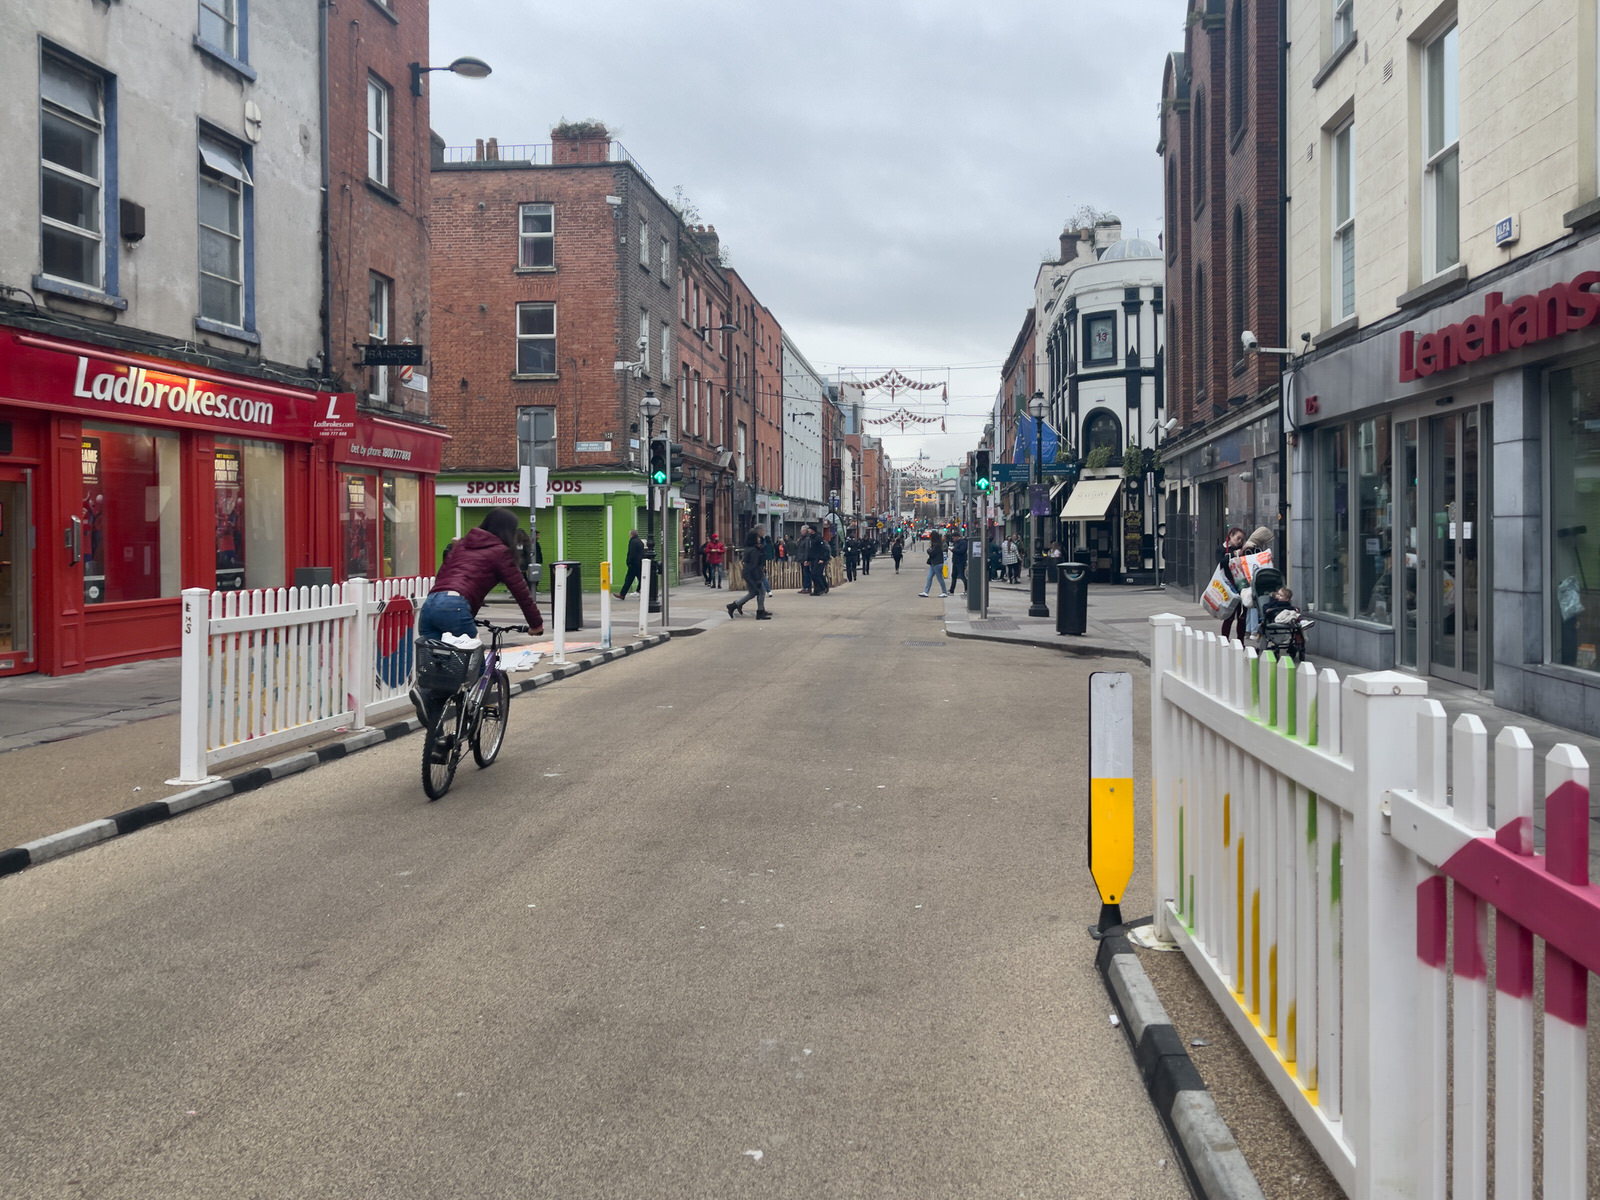 THE NEW STREET FURNITURE IS BEING INSTALLED ON CAPEL STREET [BUT THERE ARE FEW VISITORS TO BE SEEN TODAY] 005